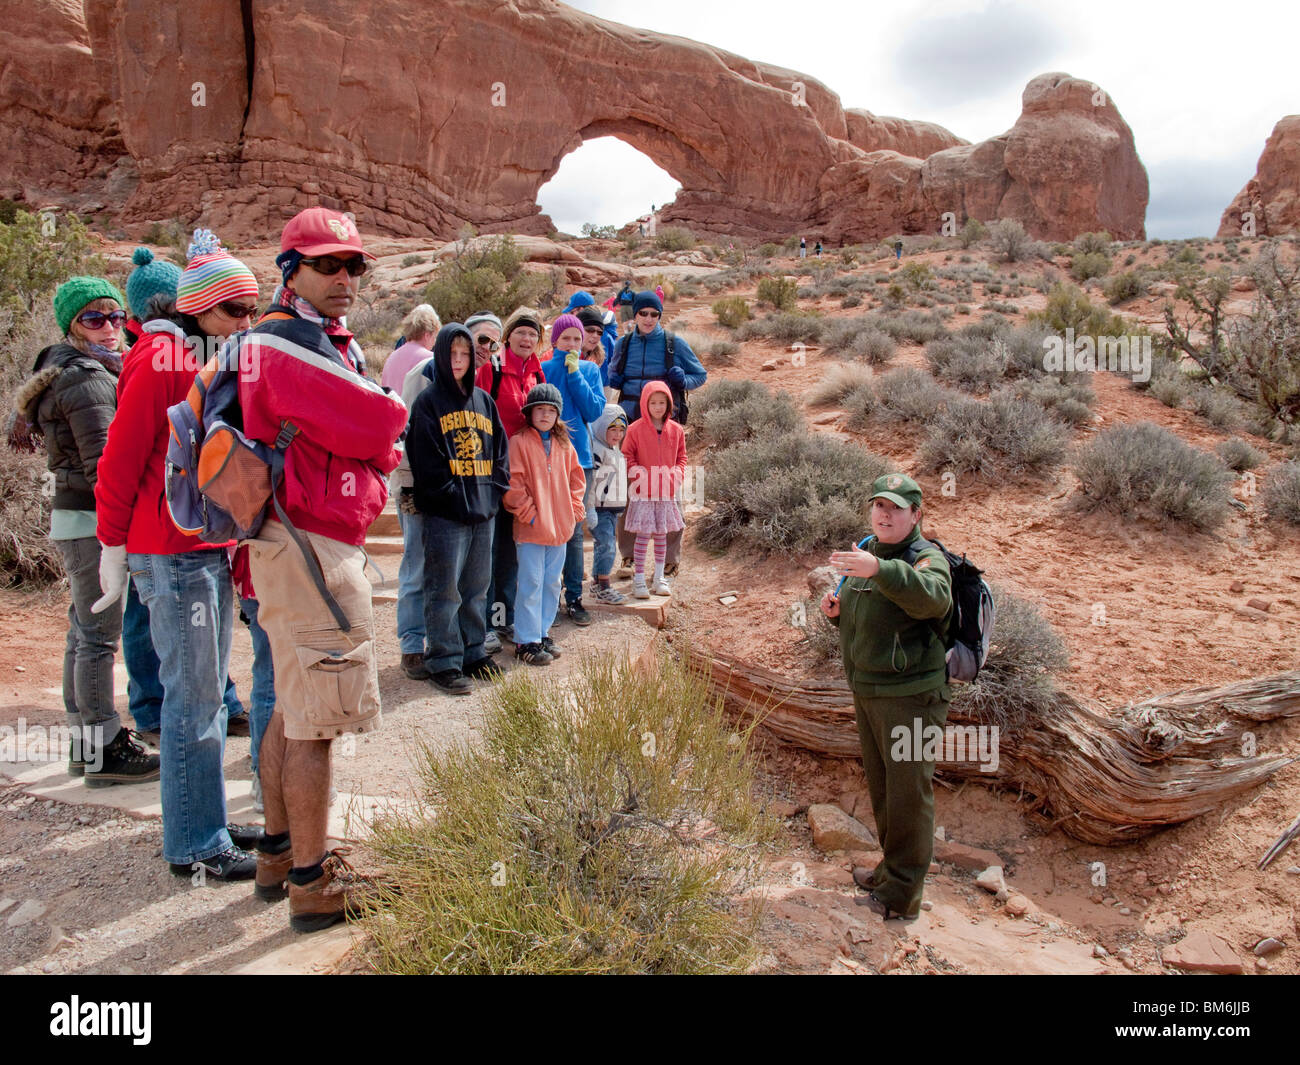 A woman park ranger speaks to a tourist group in Arches National Park, Utah. In background is Ham Rock. Stock Photo